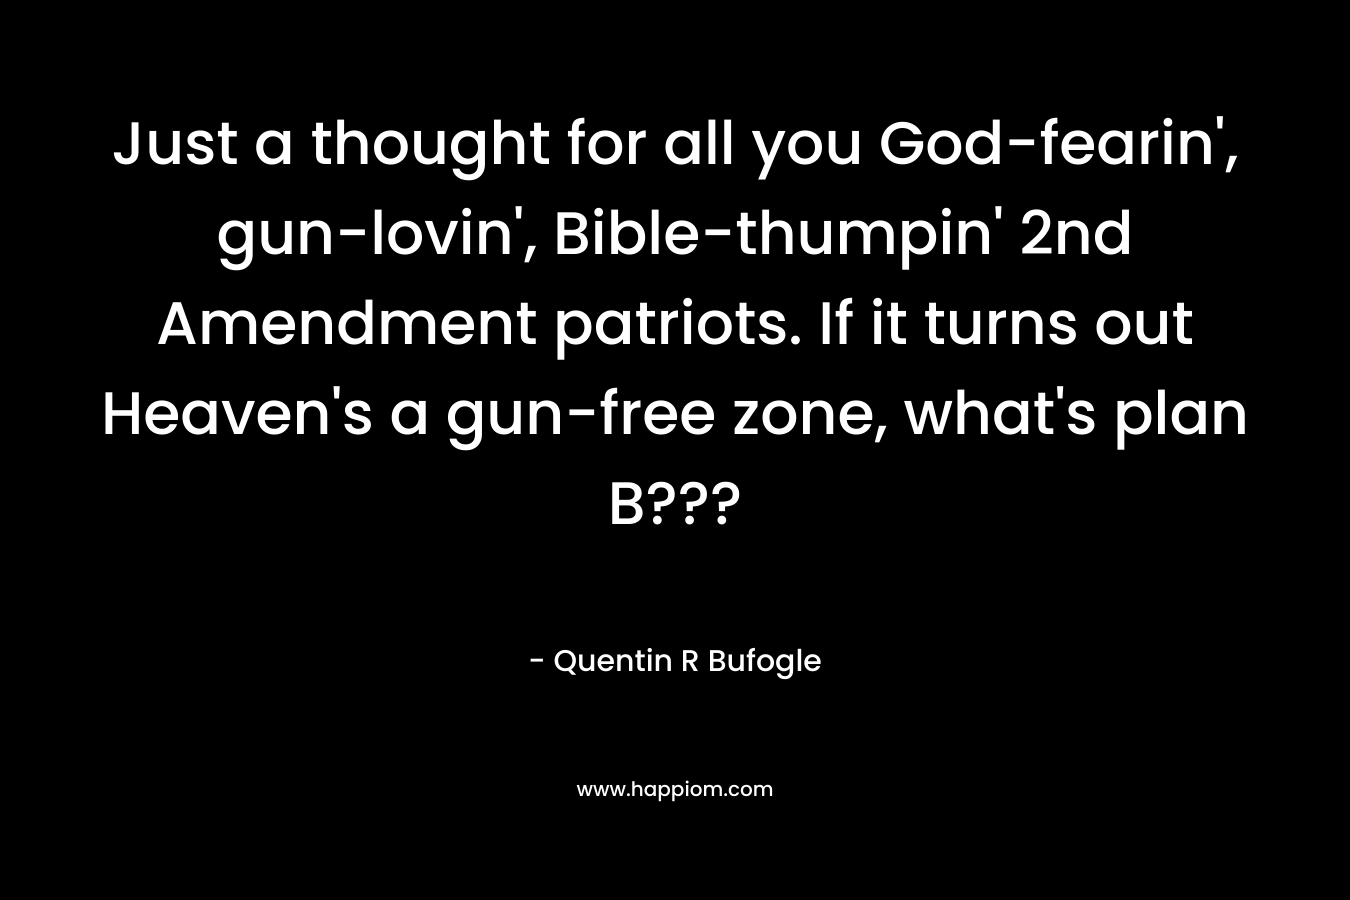 Just a thought for all you God-fearin’, gun-lovin’, Bible-thumpin’ 2nd Amendment patriots. If it turns out Heaven’s a gun-free zone, what’s plan B??? – Quentin R Bufogle